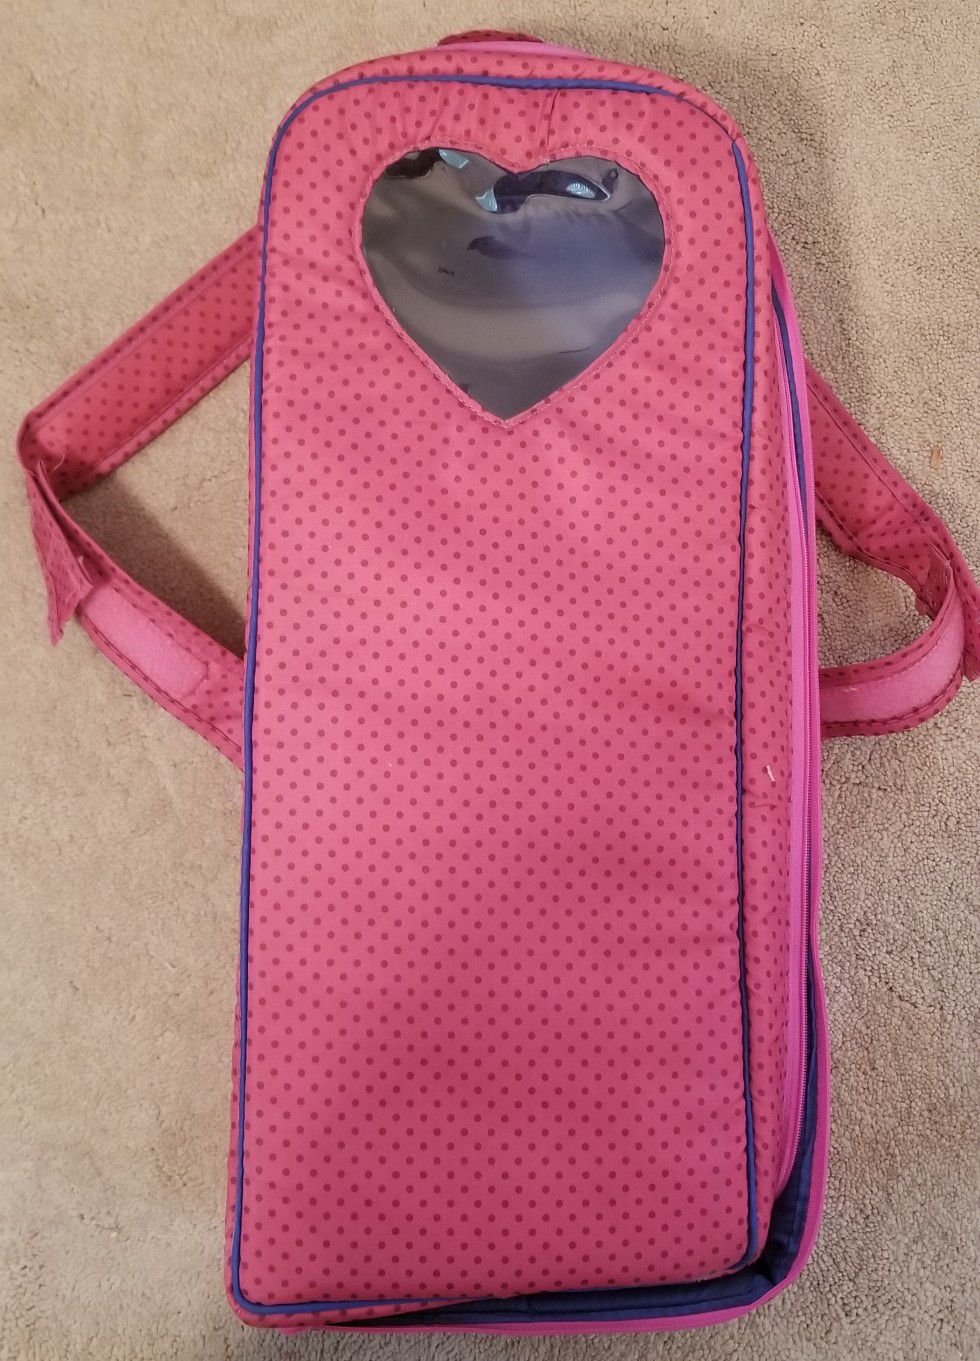 Our Generation 18" Doll Backpack Carrier